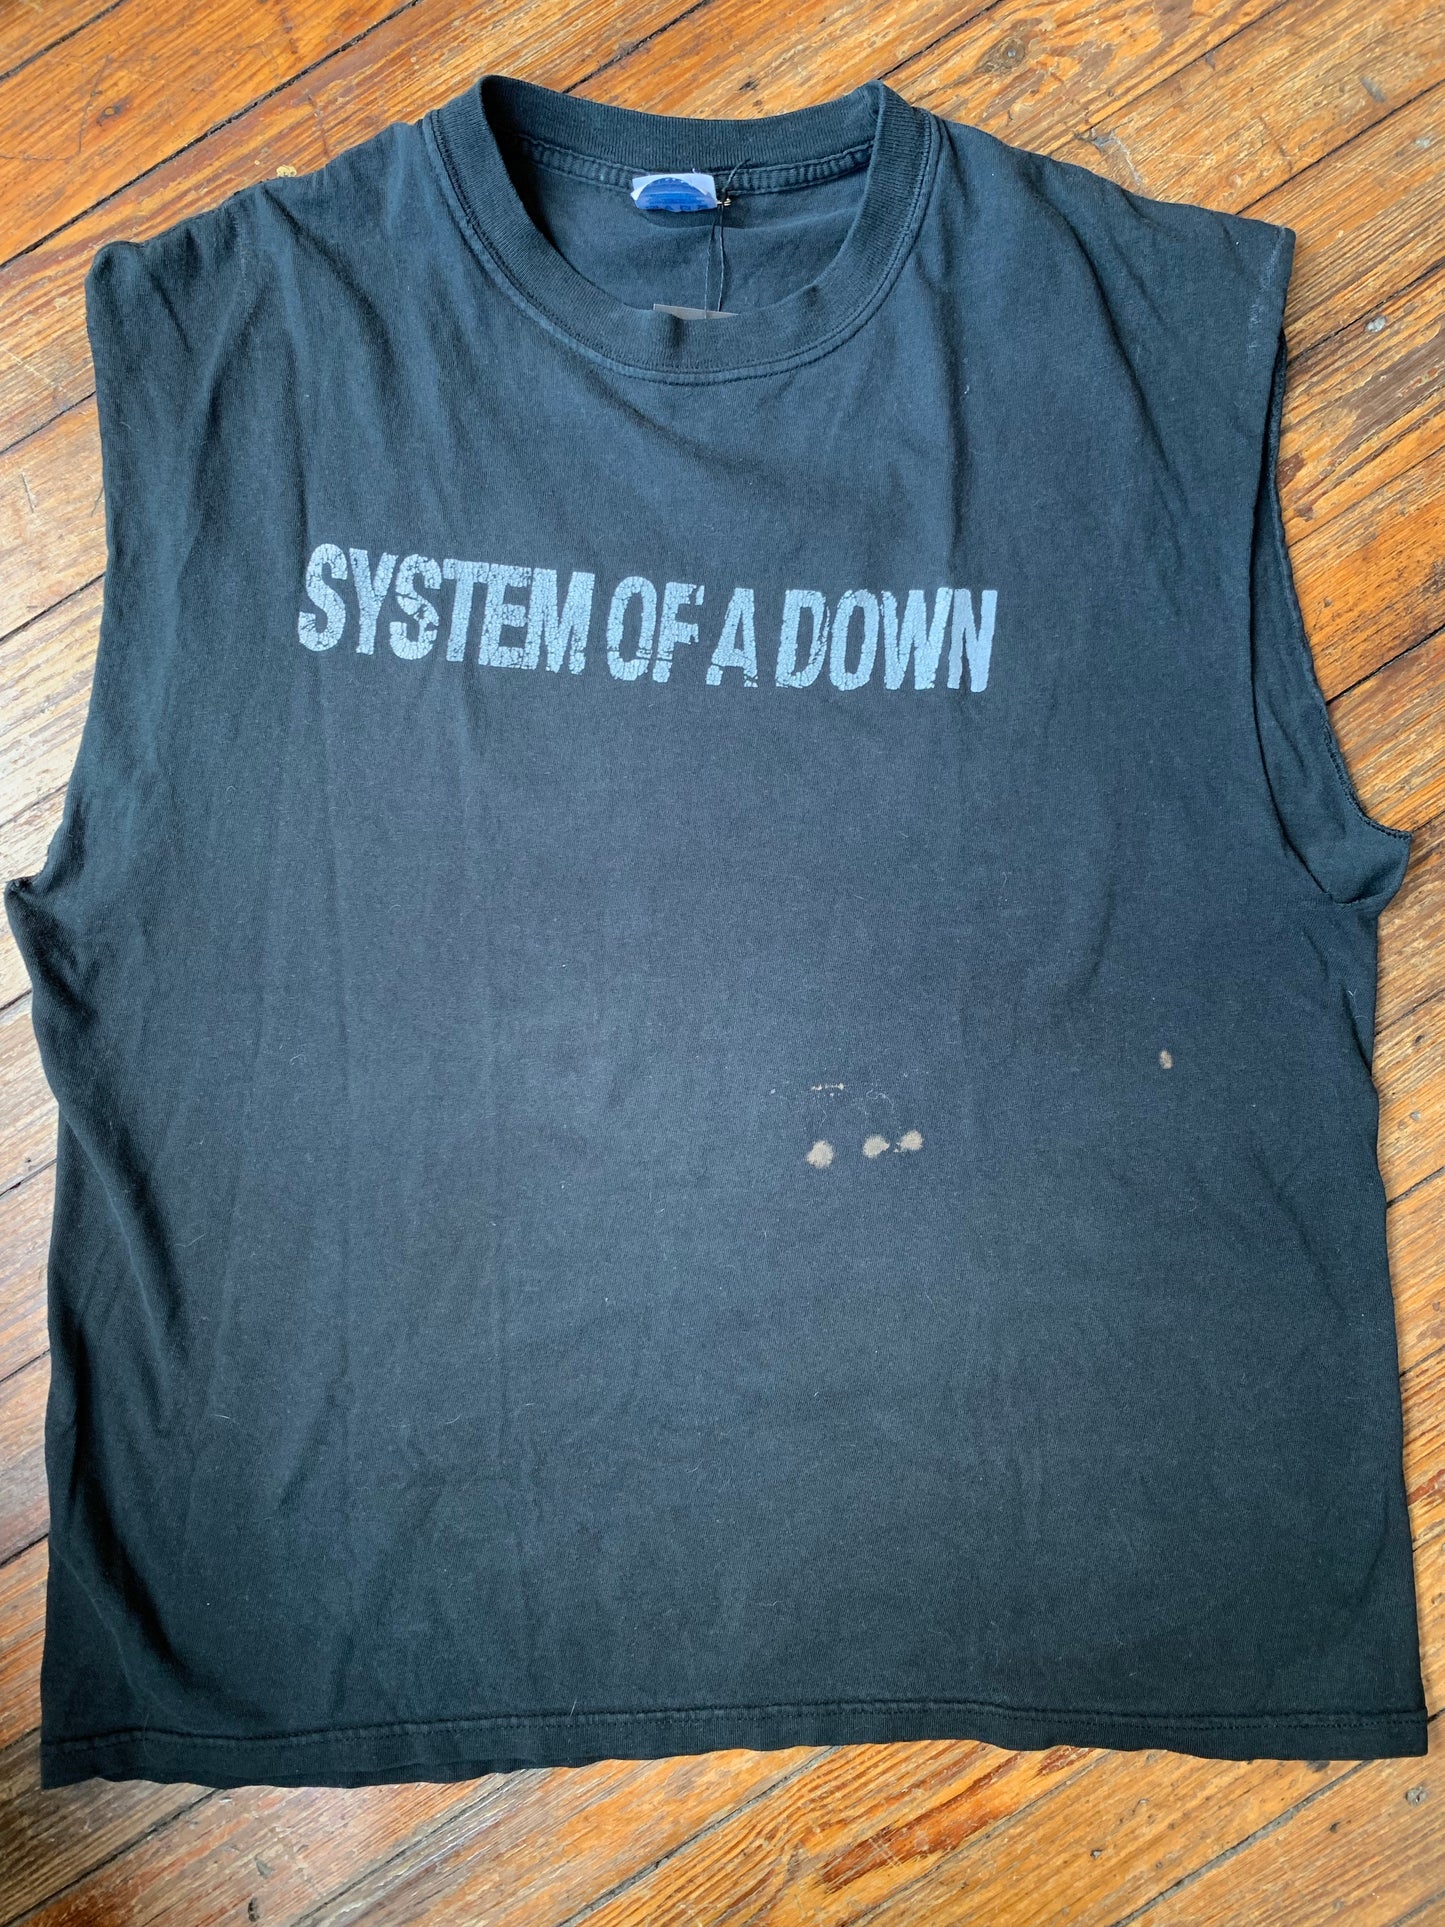 2005 System of a Down Sleeveless T-Shirt